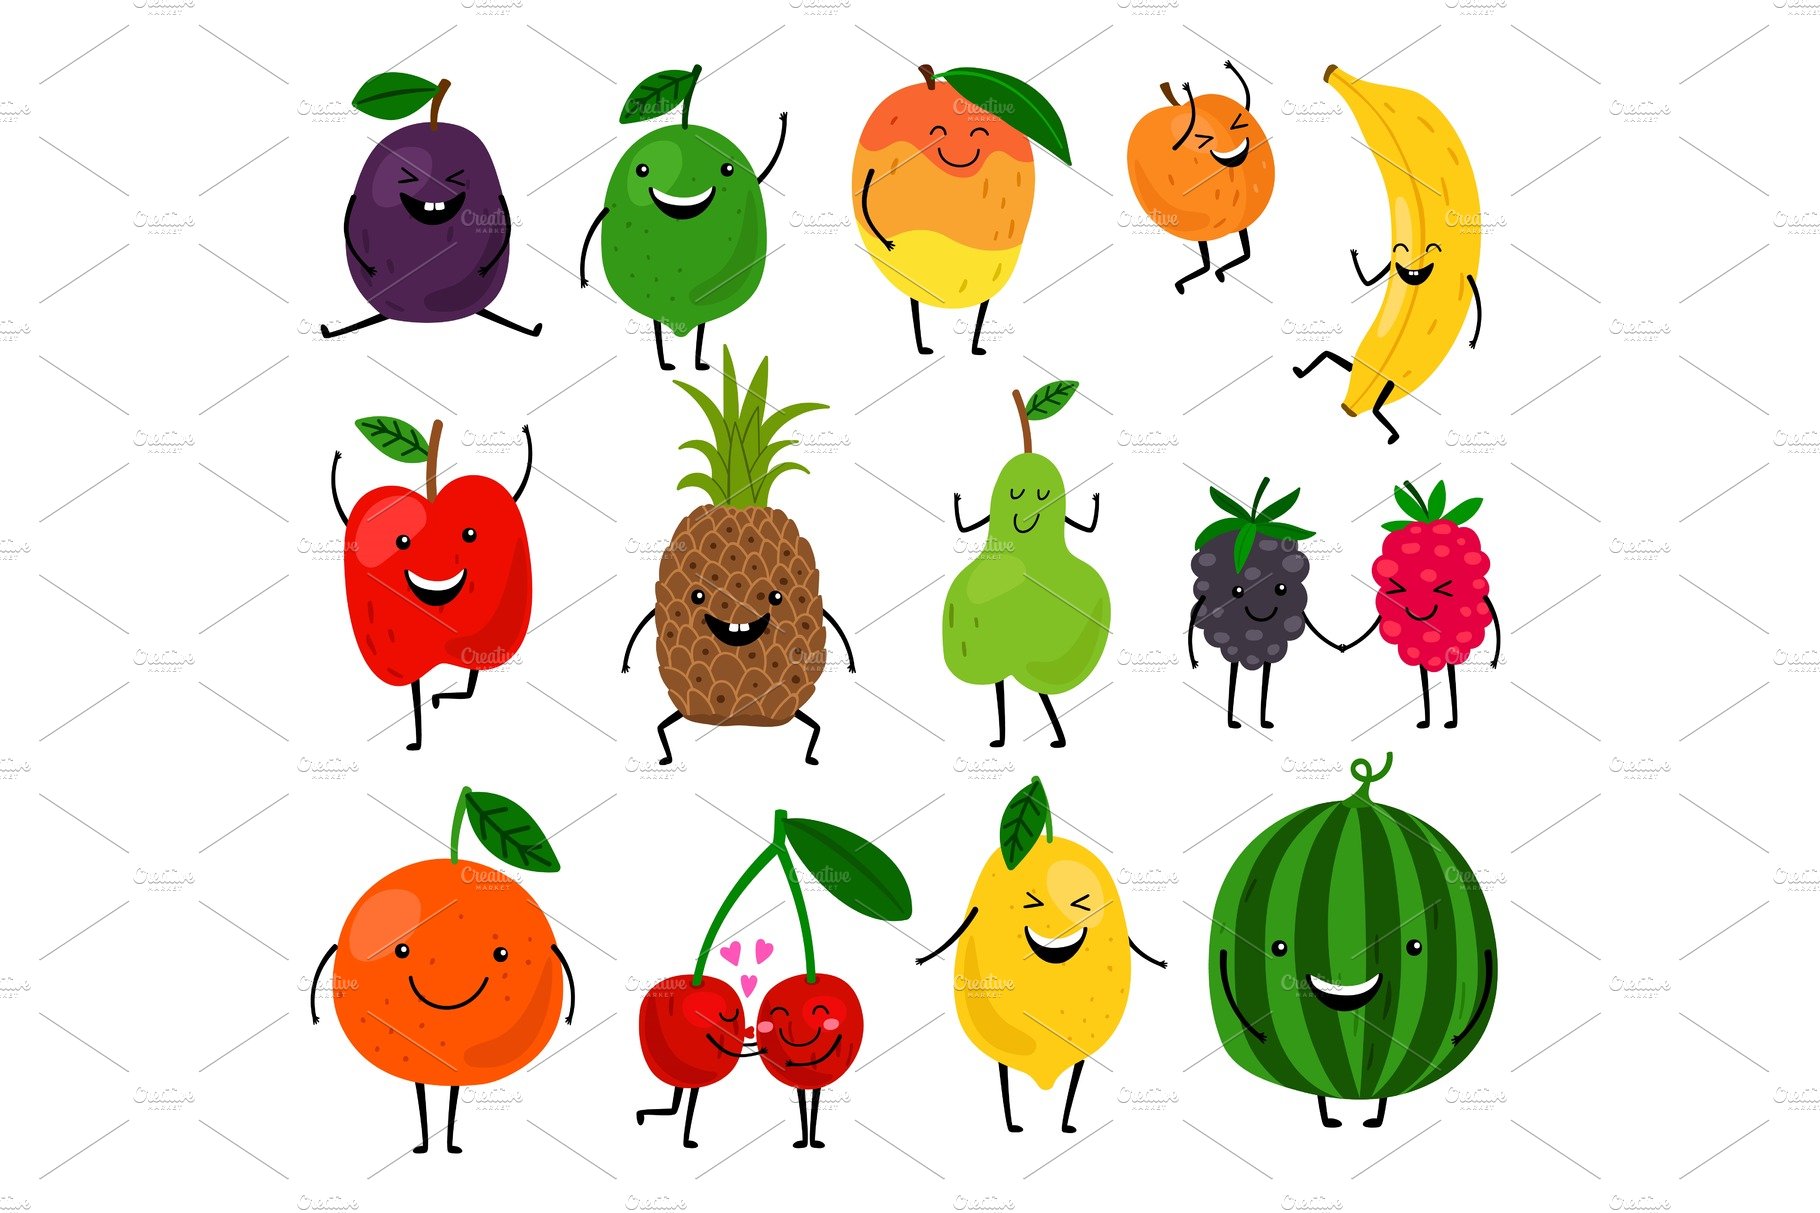 Cute fruit characters for kids cover image.